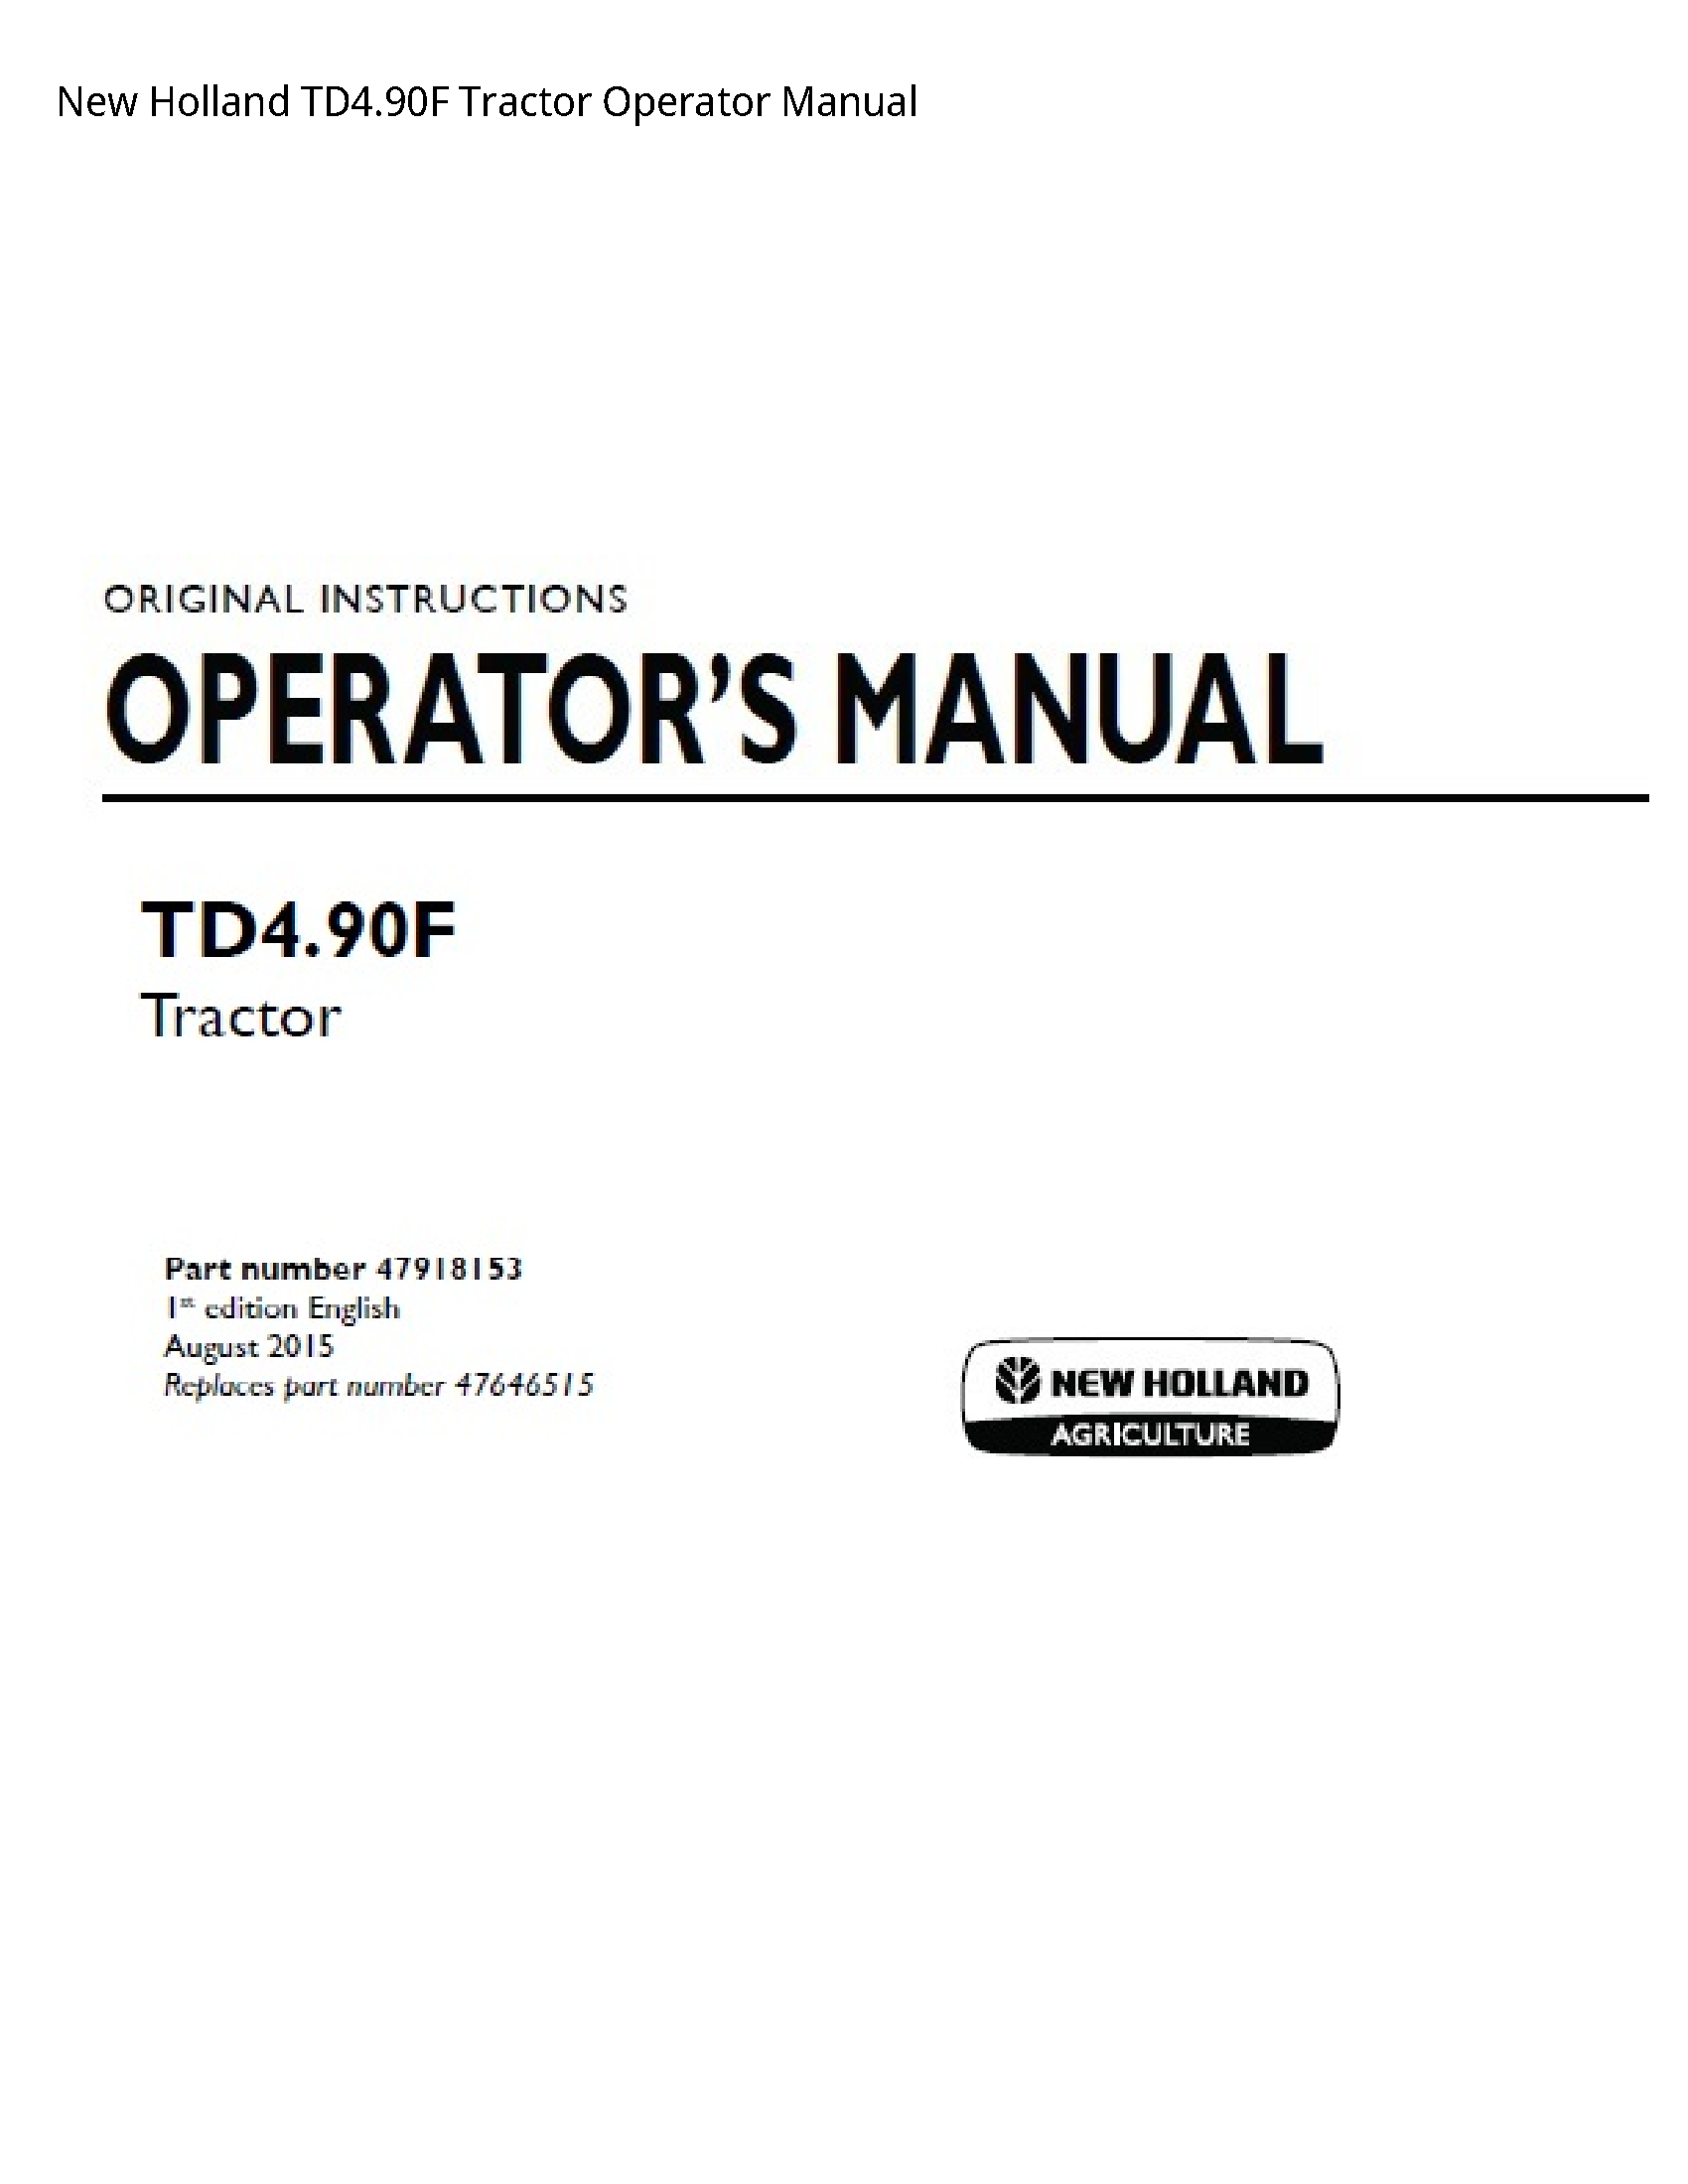 New Holland TD4.90F Tractor Operator manual